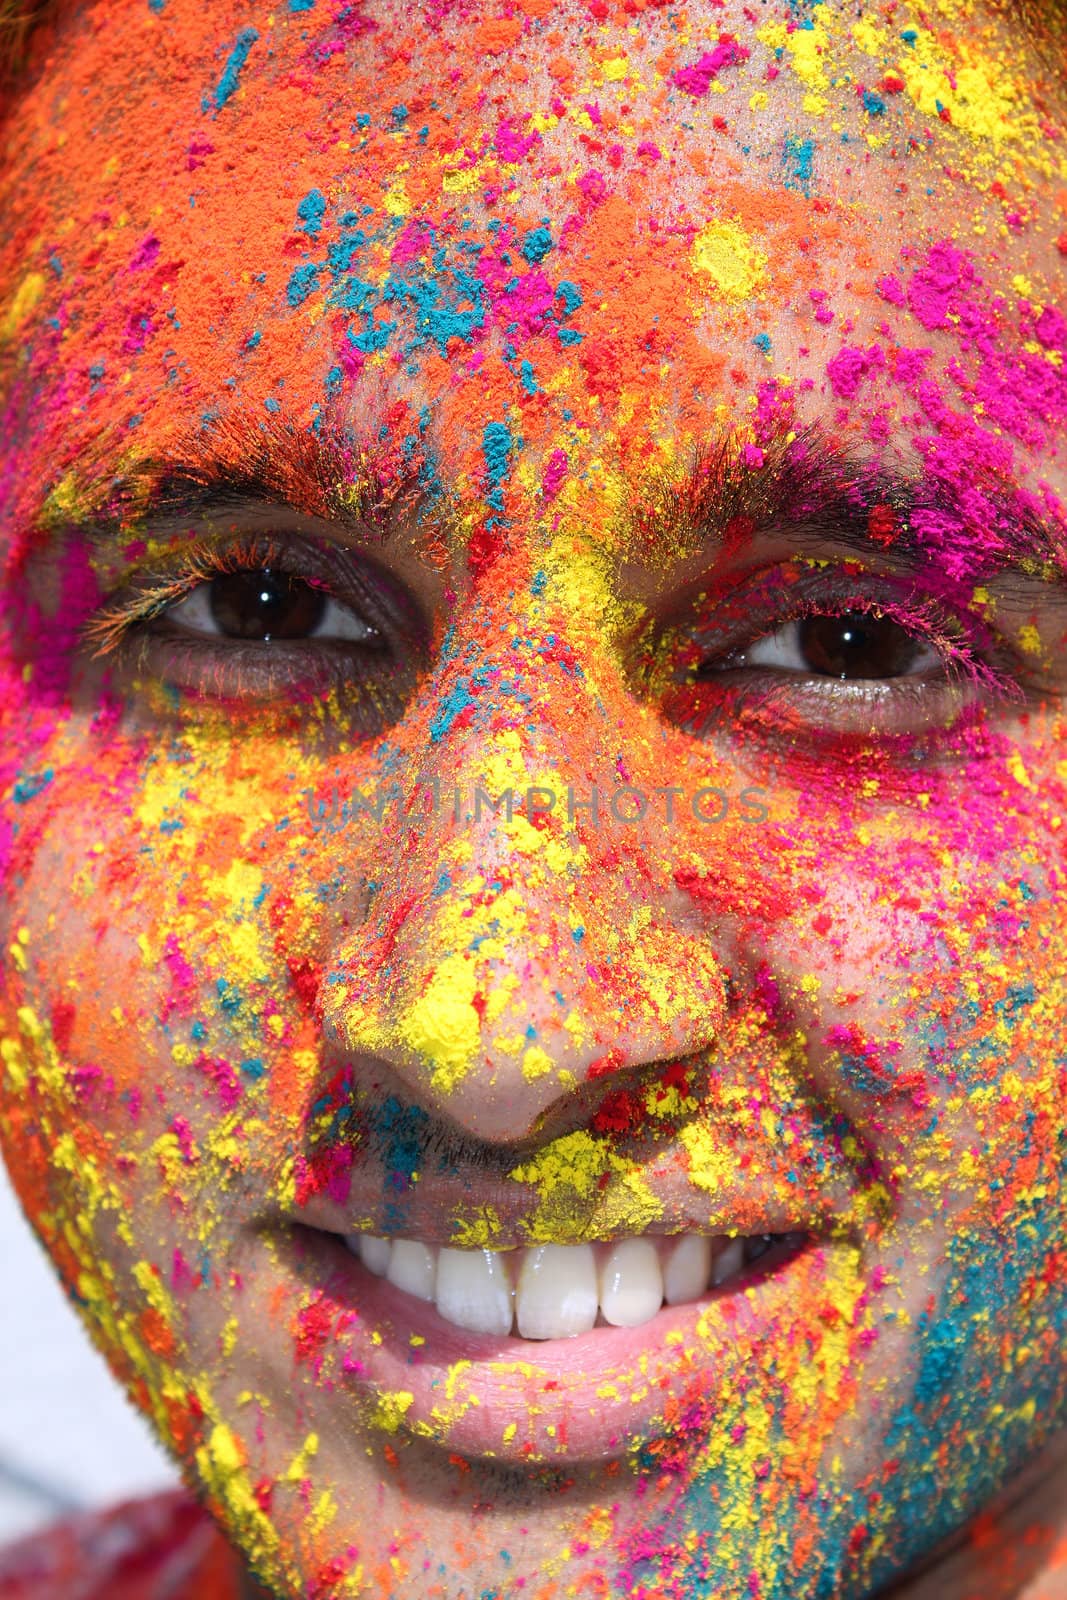 A portrait of a young Indian man with his face covered with colored powder, during holi festival.